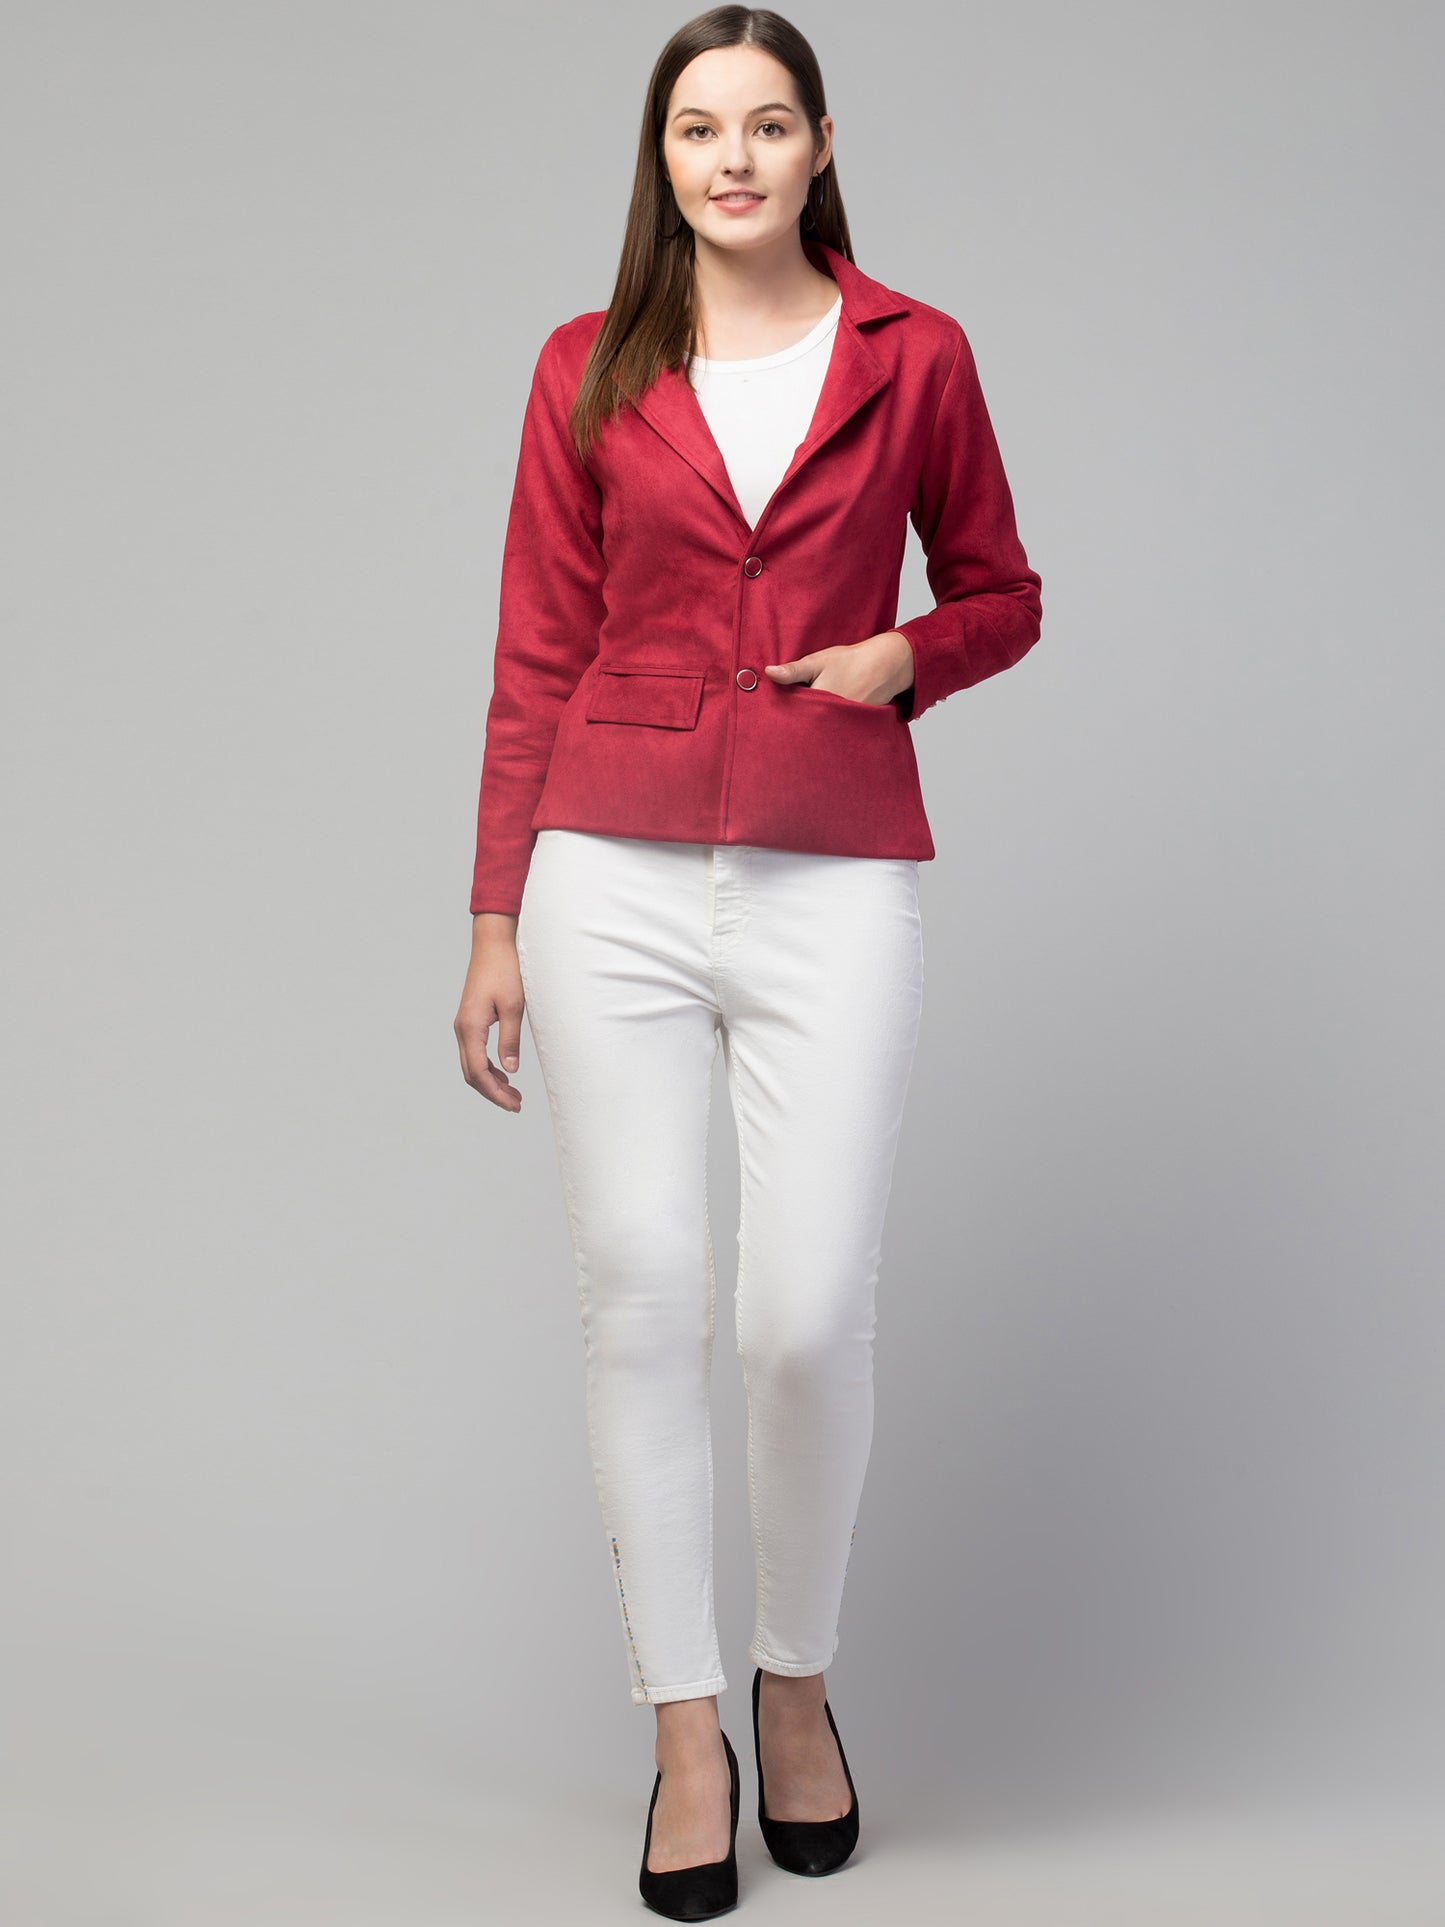 Red Color Suede Fabric Girls Blazer